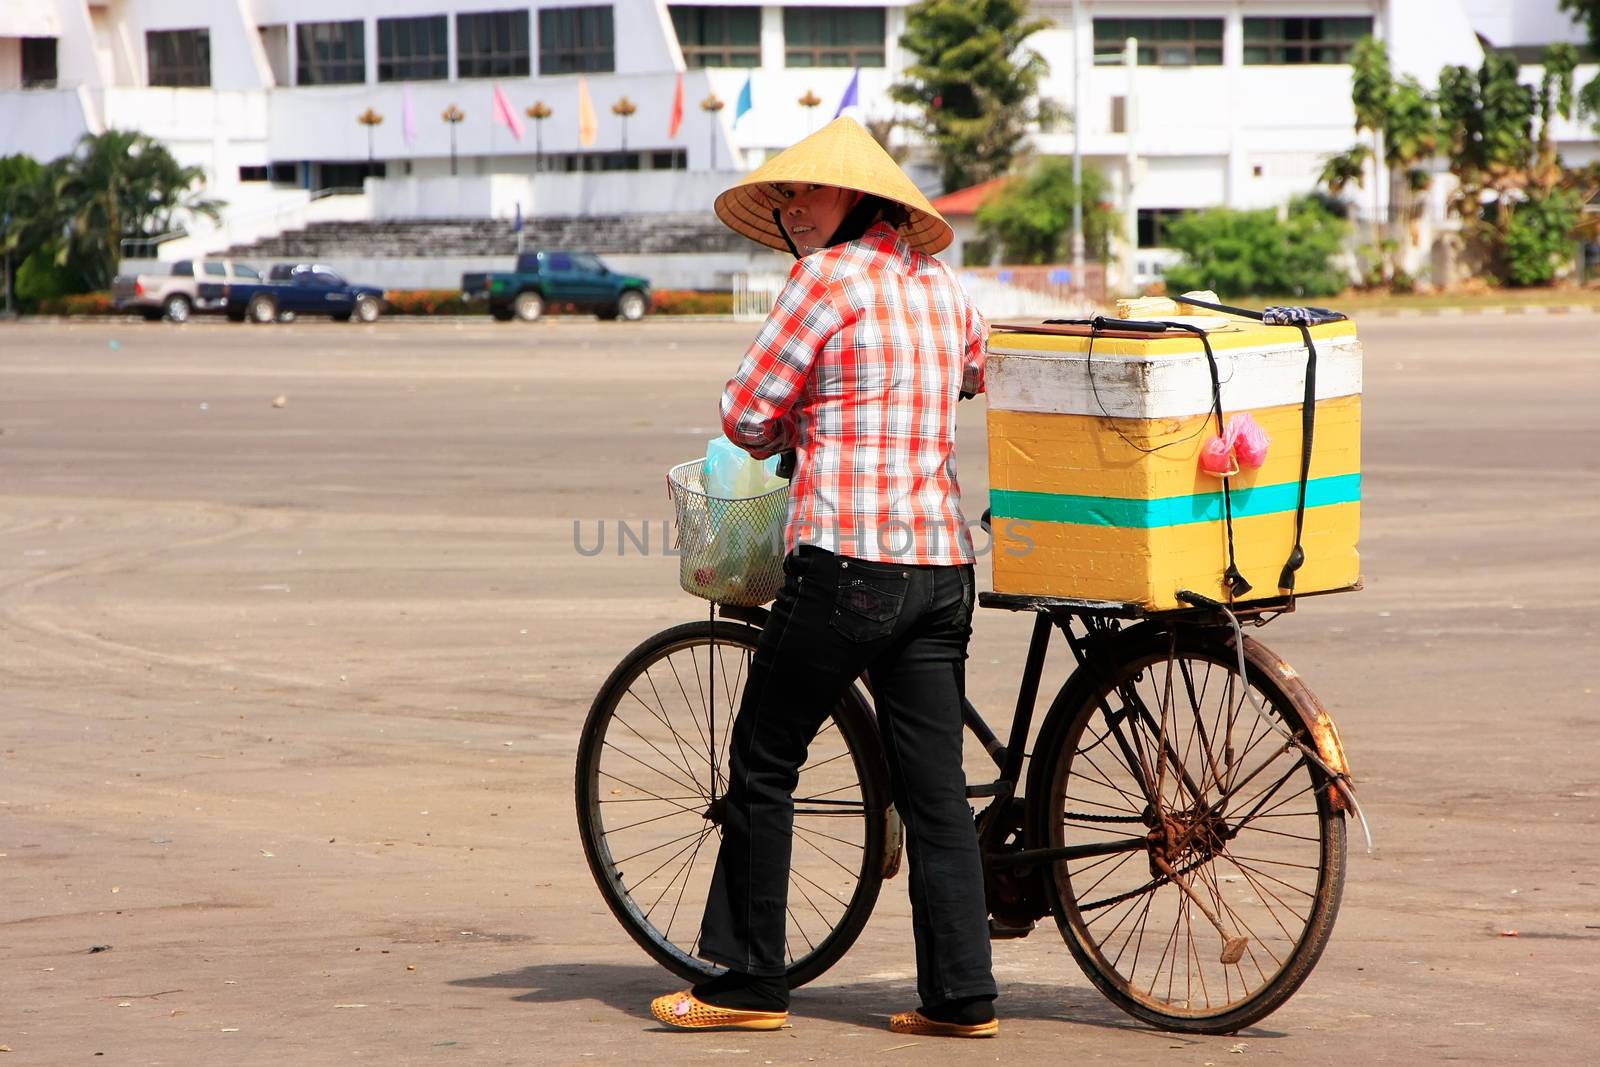 Local woman selling ice cream on the street, Vientiane, Laos, Southeast Asia